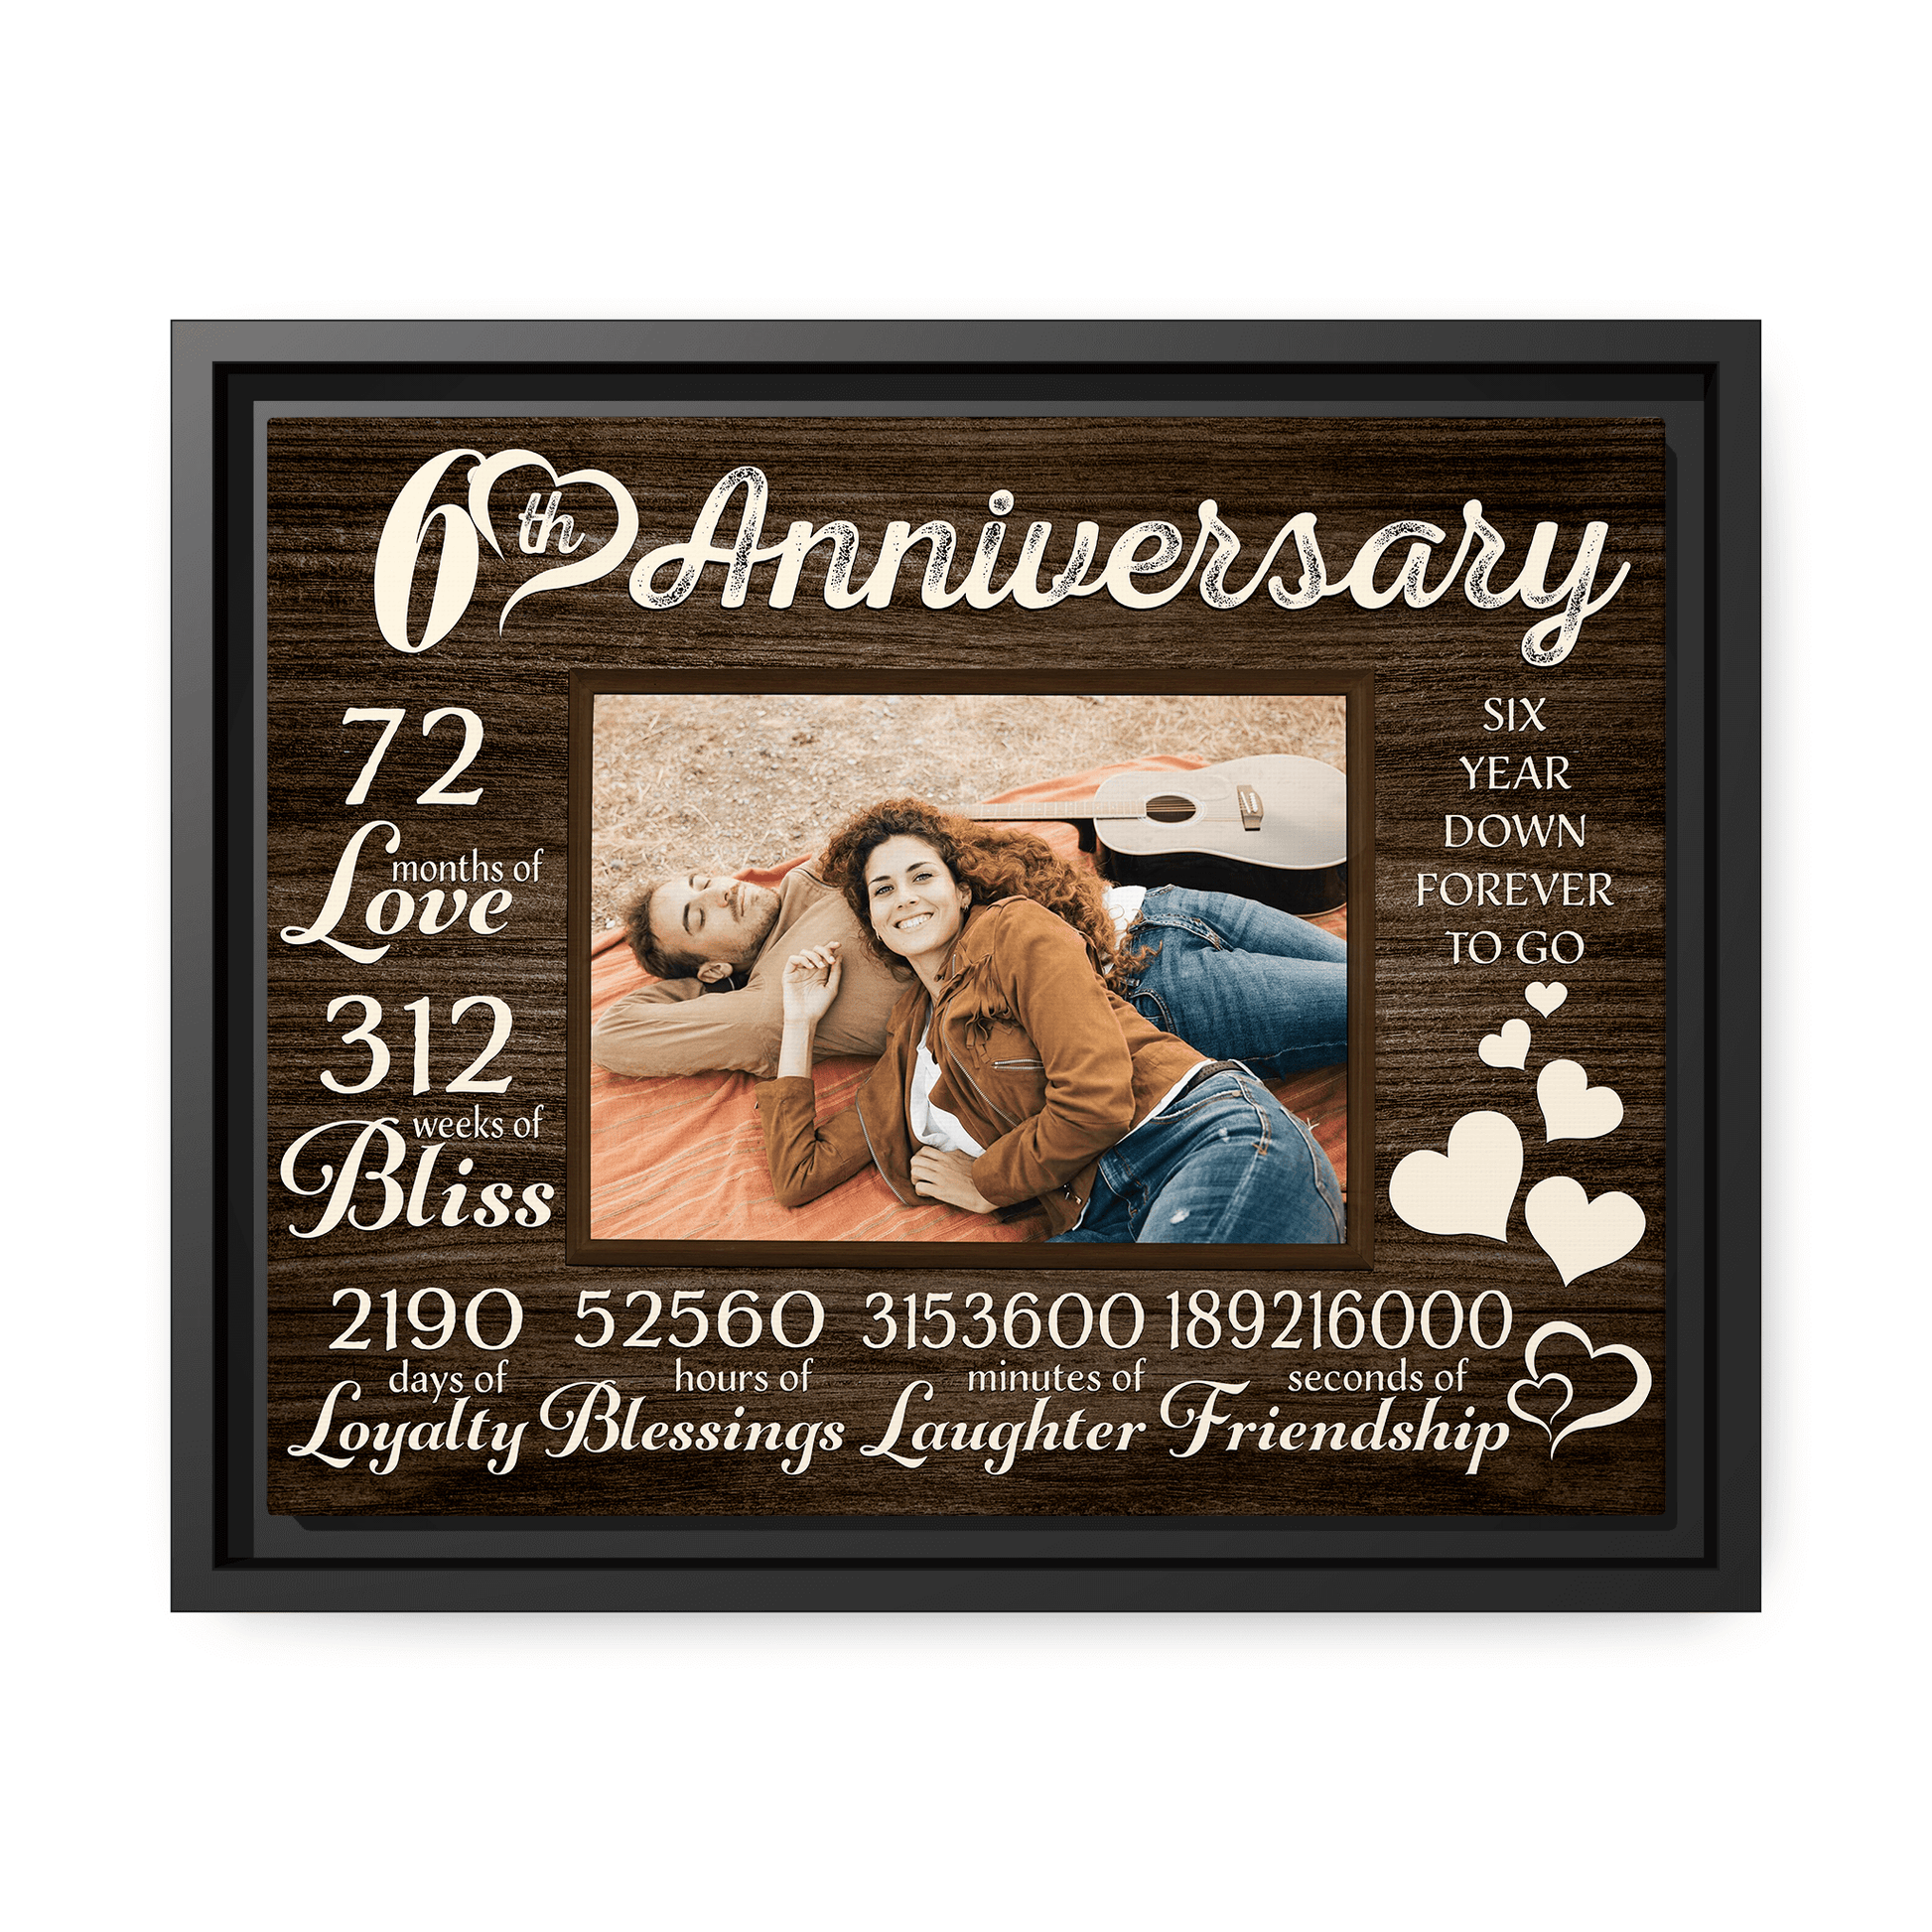 Personalized 6 year anniversary gift for him for her - 72 months of love - custom Couple Canvas print - MyMindfulGifts